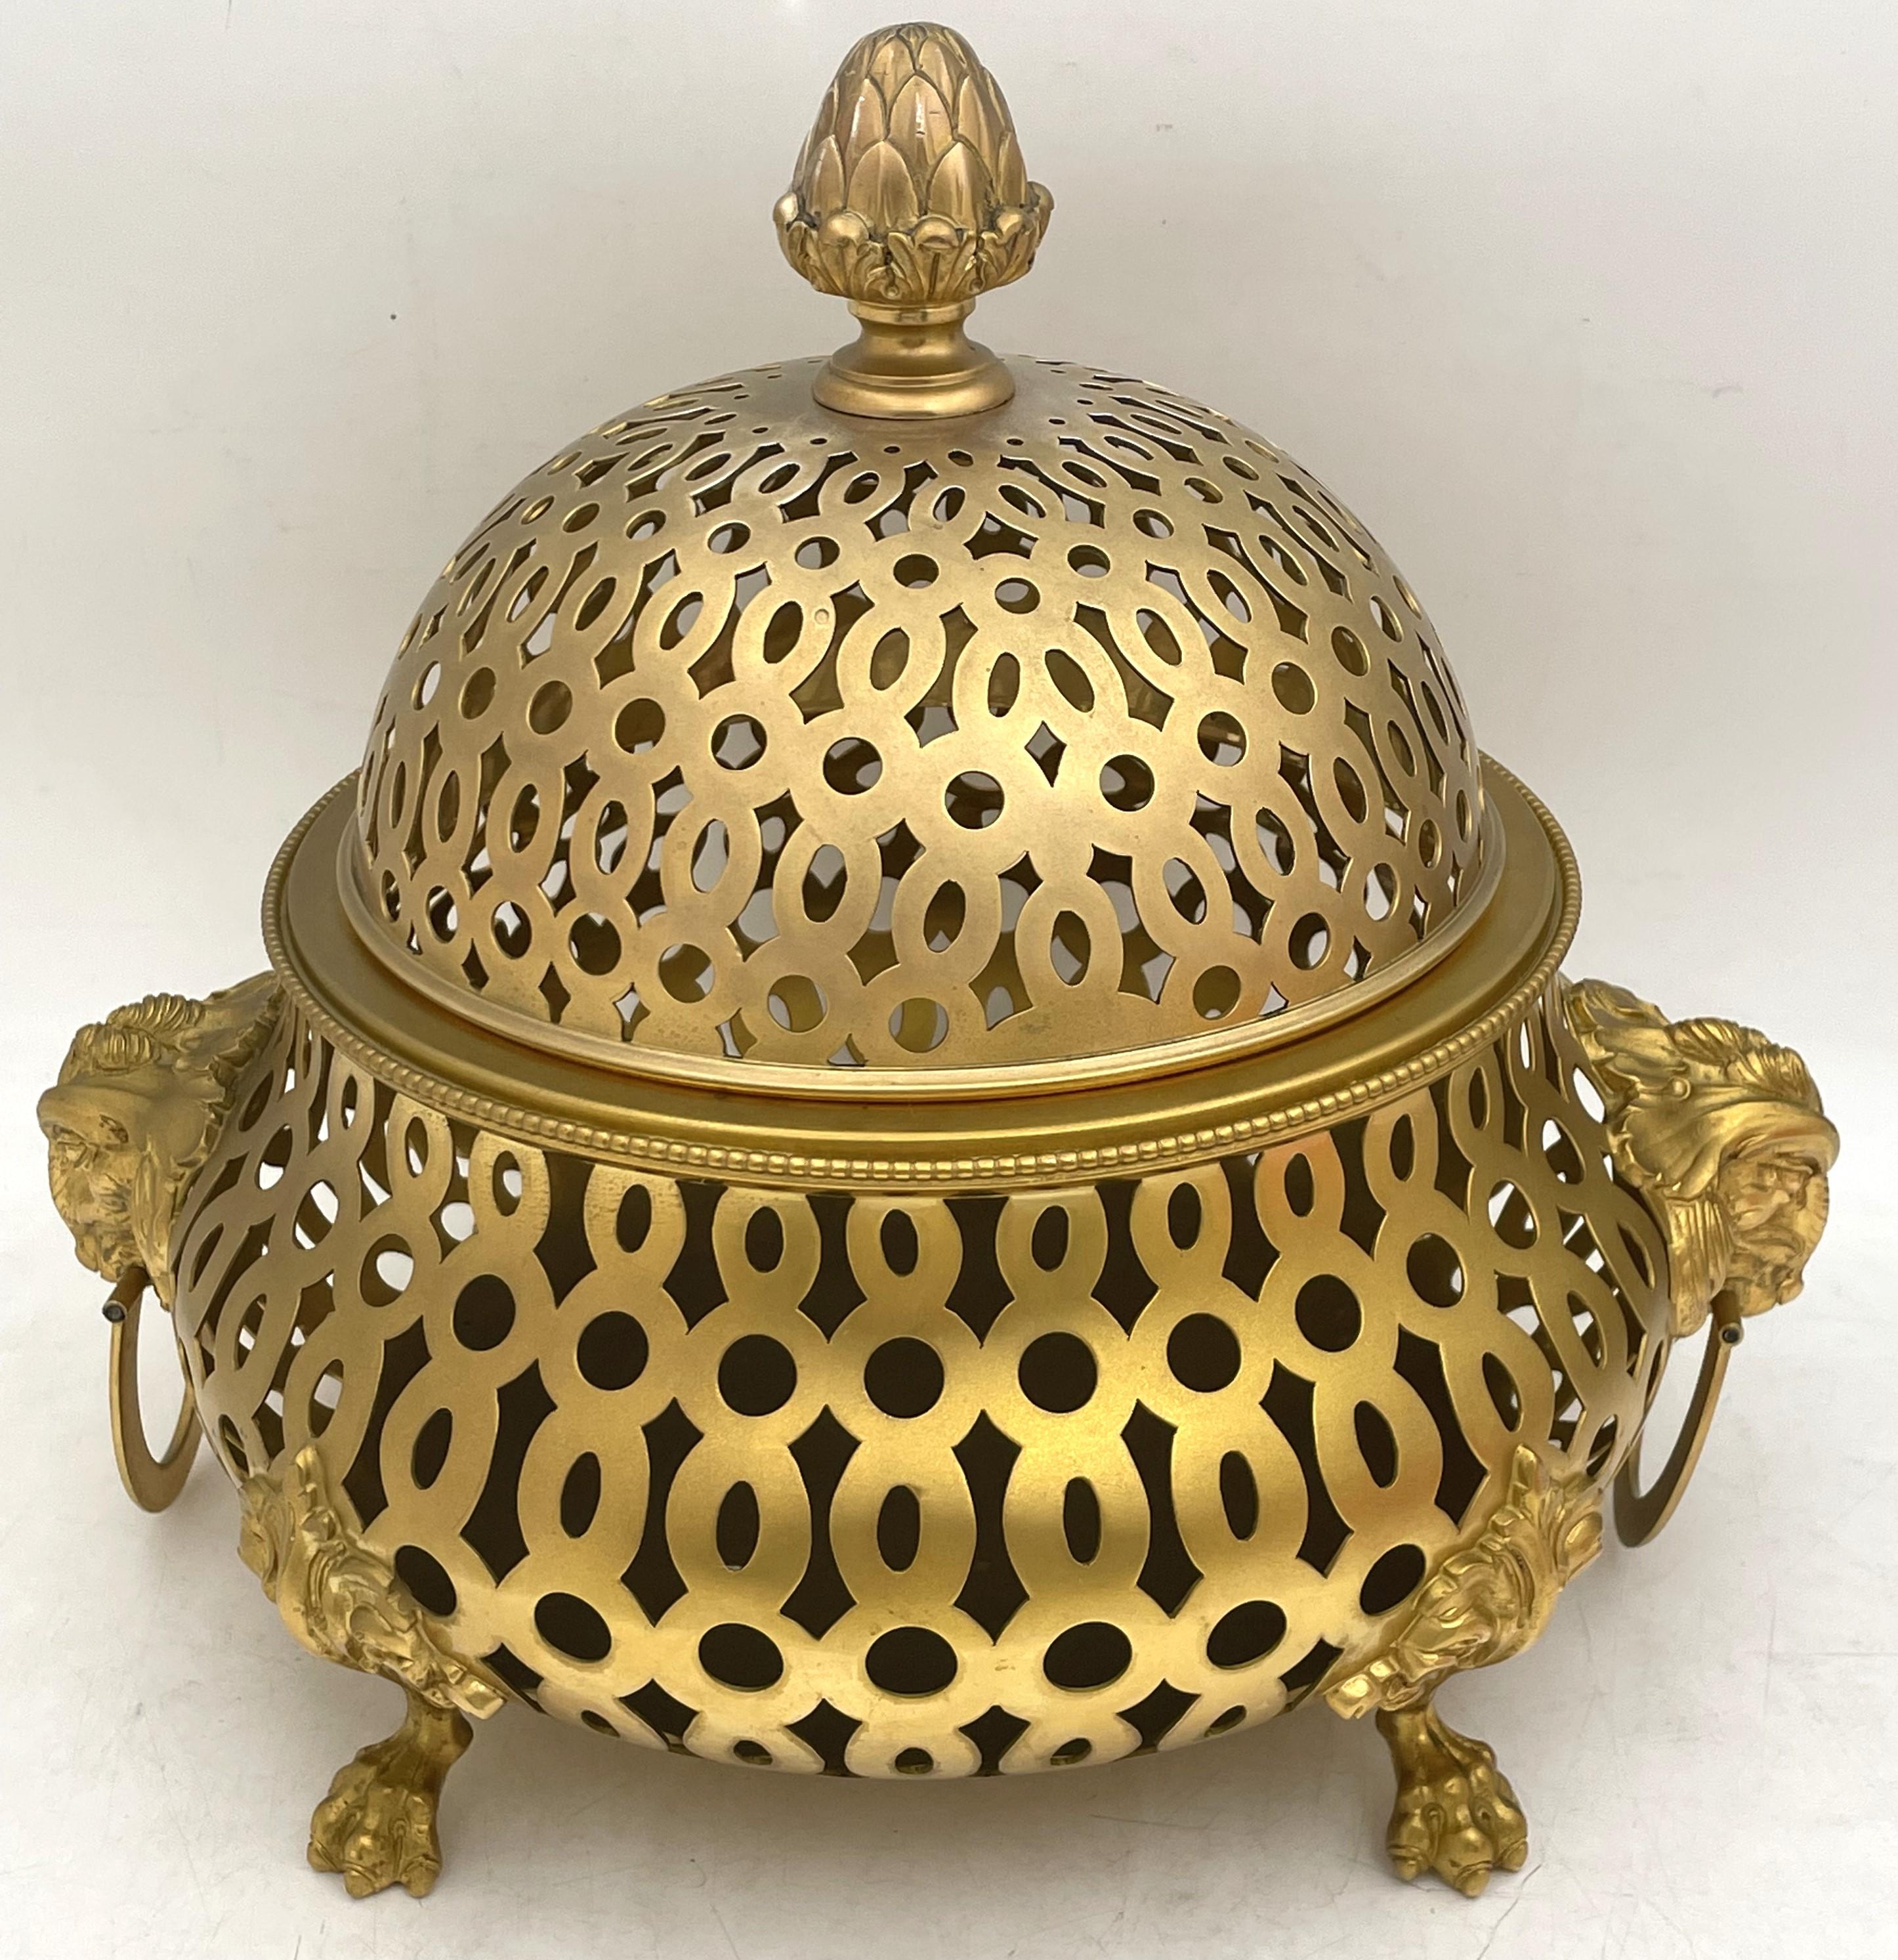 Tiffany & Co. rare gilt sterling silver rose centerpiece bowl or potpourri, beautifully adorned with a finial, two lions and with a pierced, geometric design, standing on 4 clawed feet. It was made in the mid-20th century in Italy, measures 13''